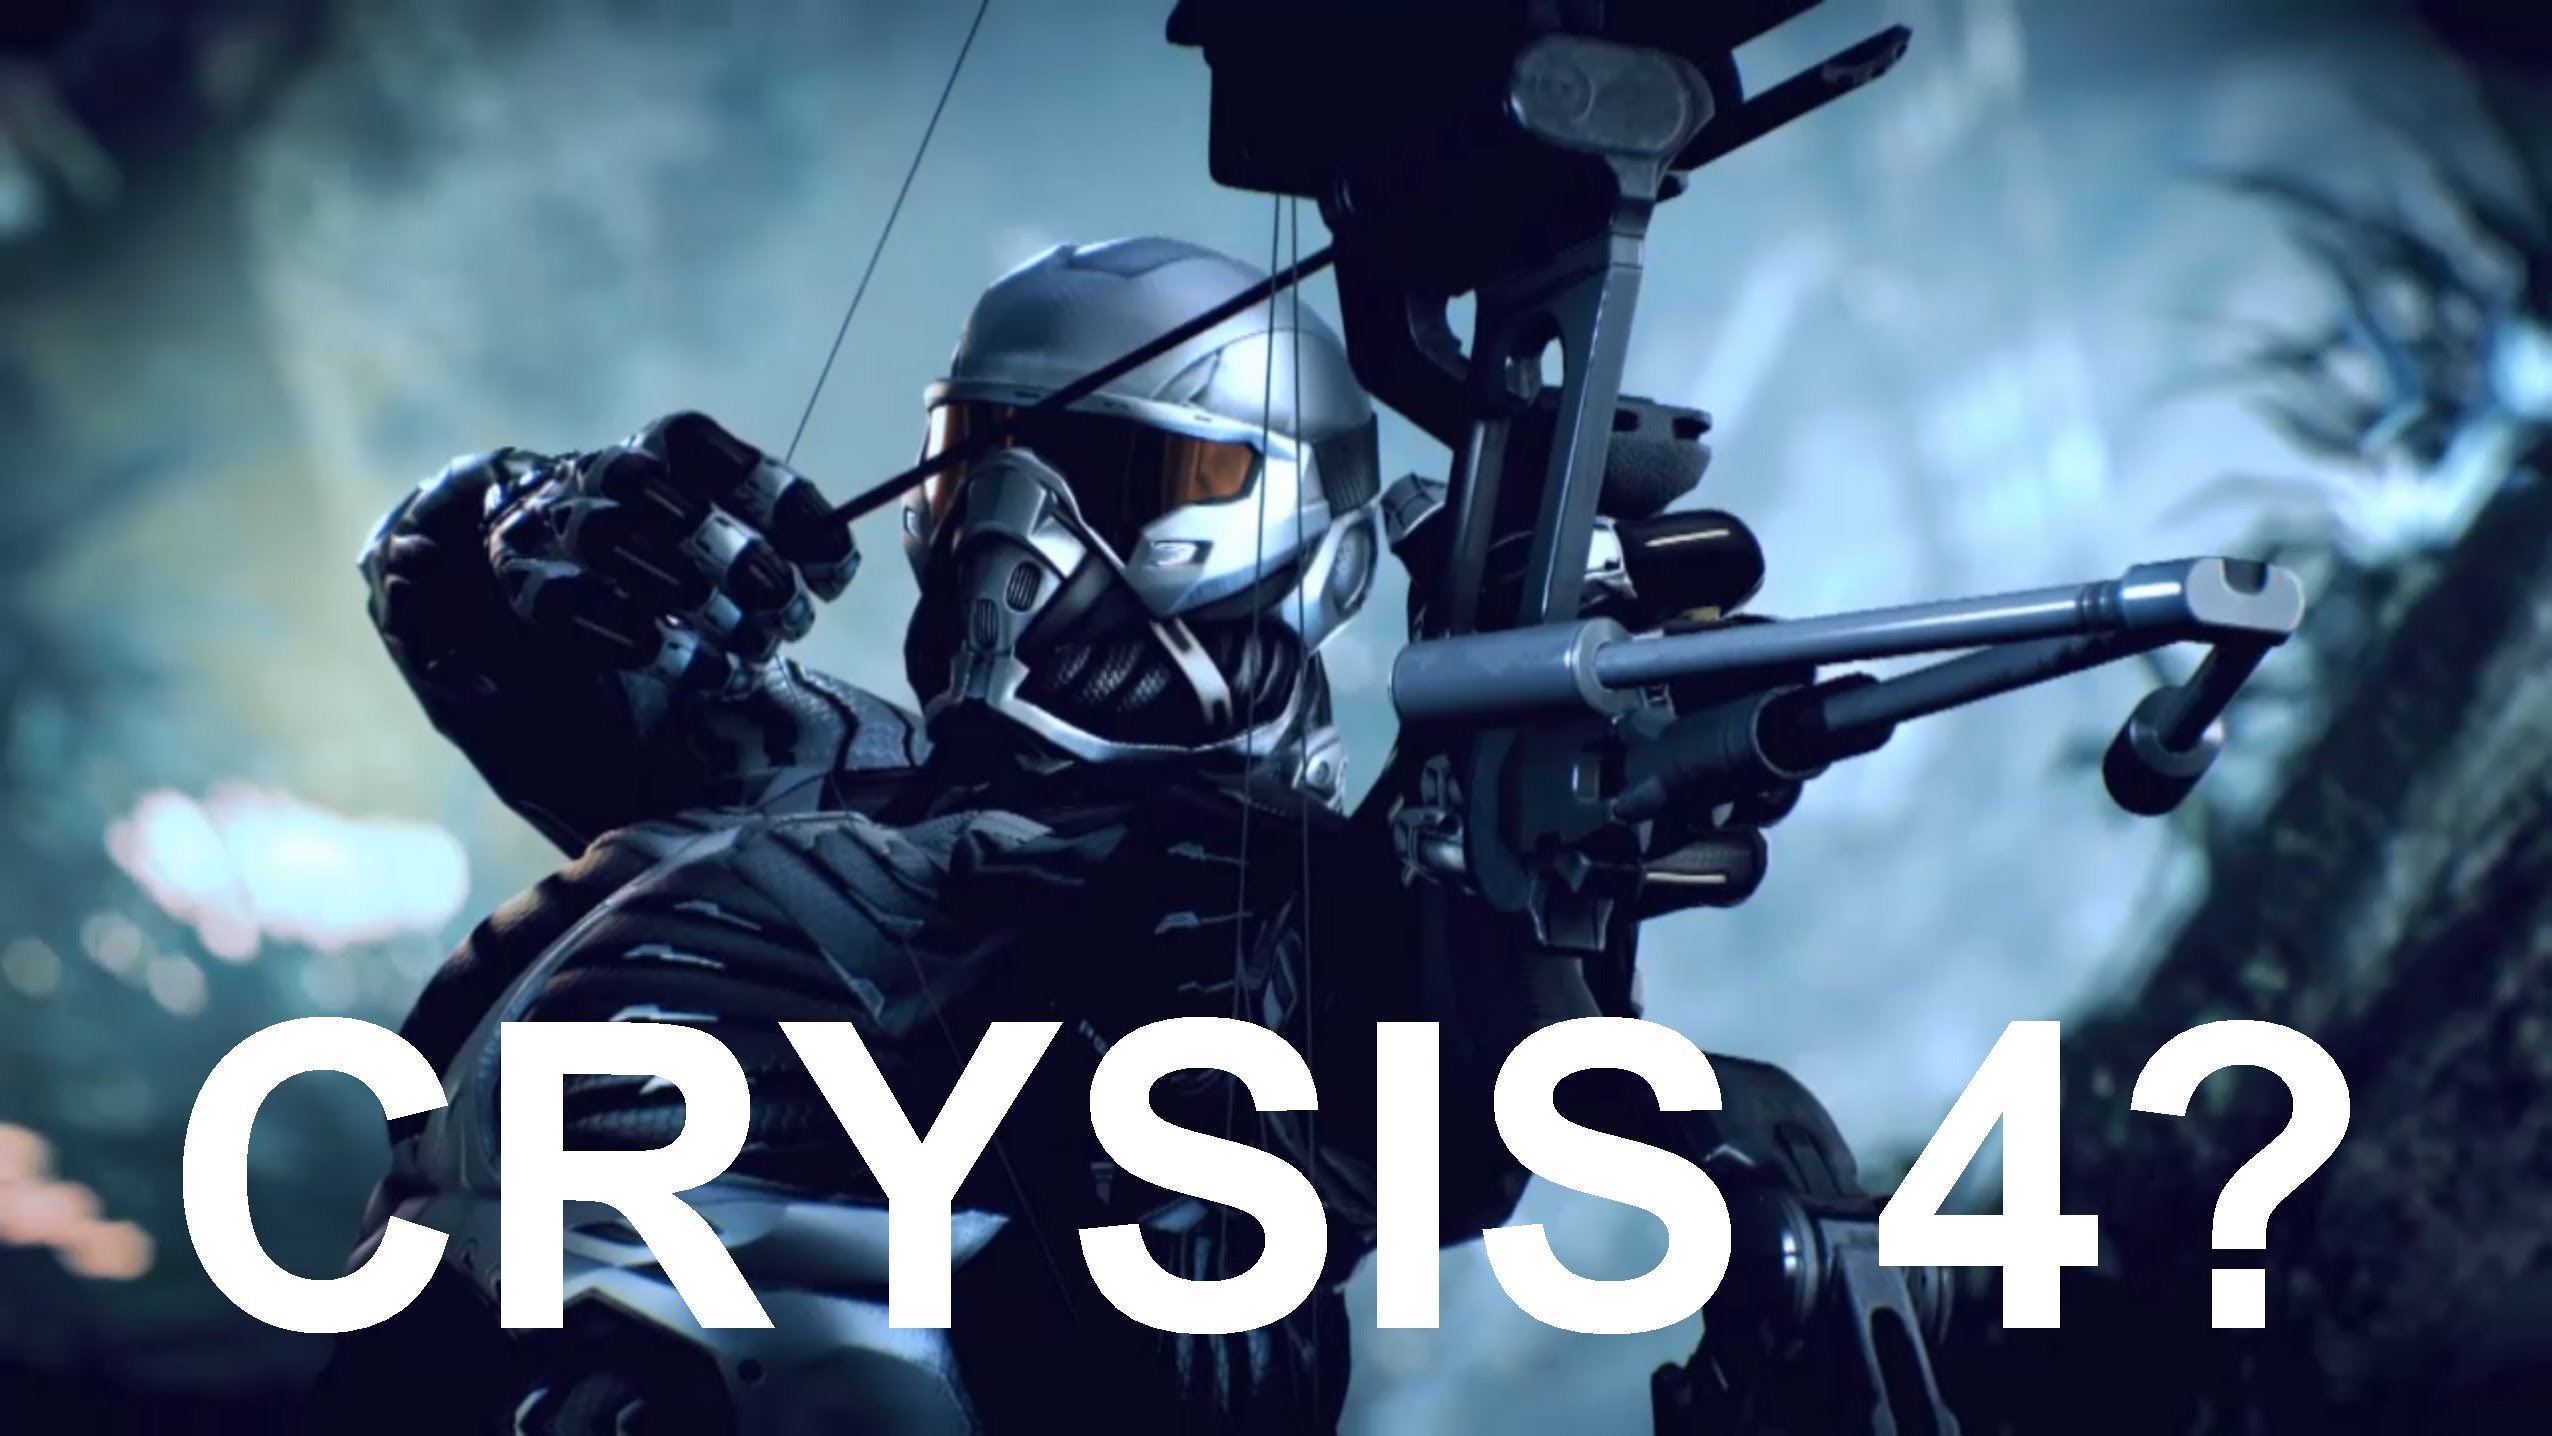 HQ Crysis 4 Wallpapers | File 256.06Kb